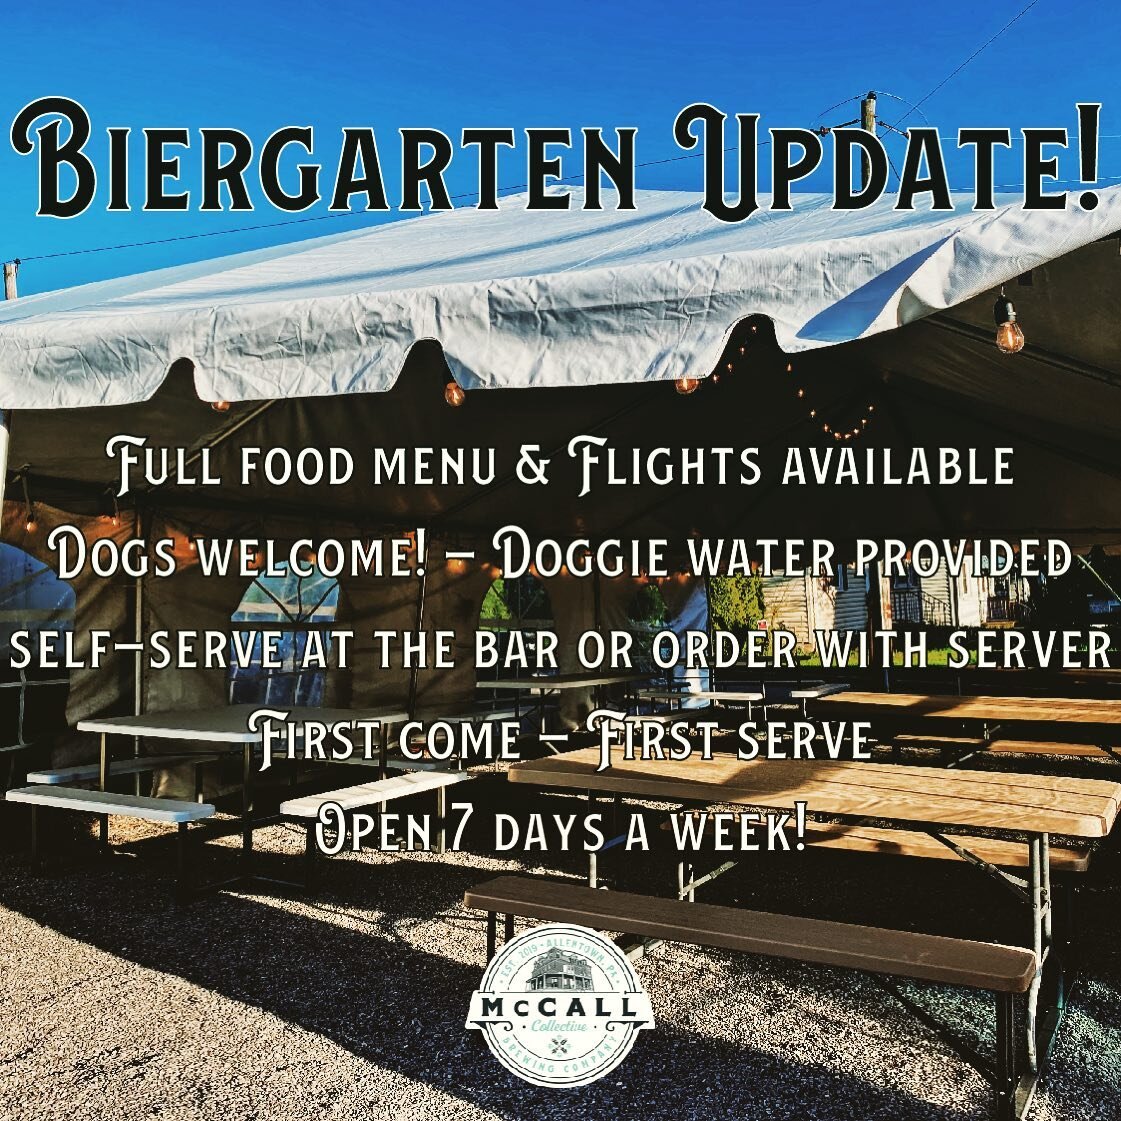 Summer is officially here! Well technically not for another few days but we wanted to inform everyone of some exciting news.

The Biergarten is now open with our full food menu. We&rsquo;ve also added some doggie water bowls and the ability to do sel